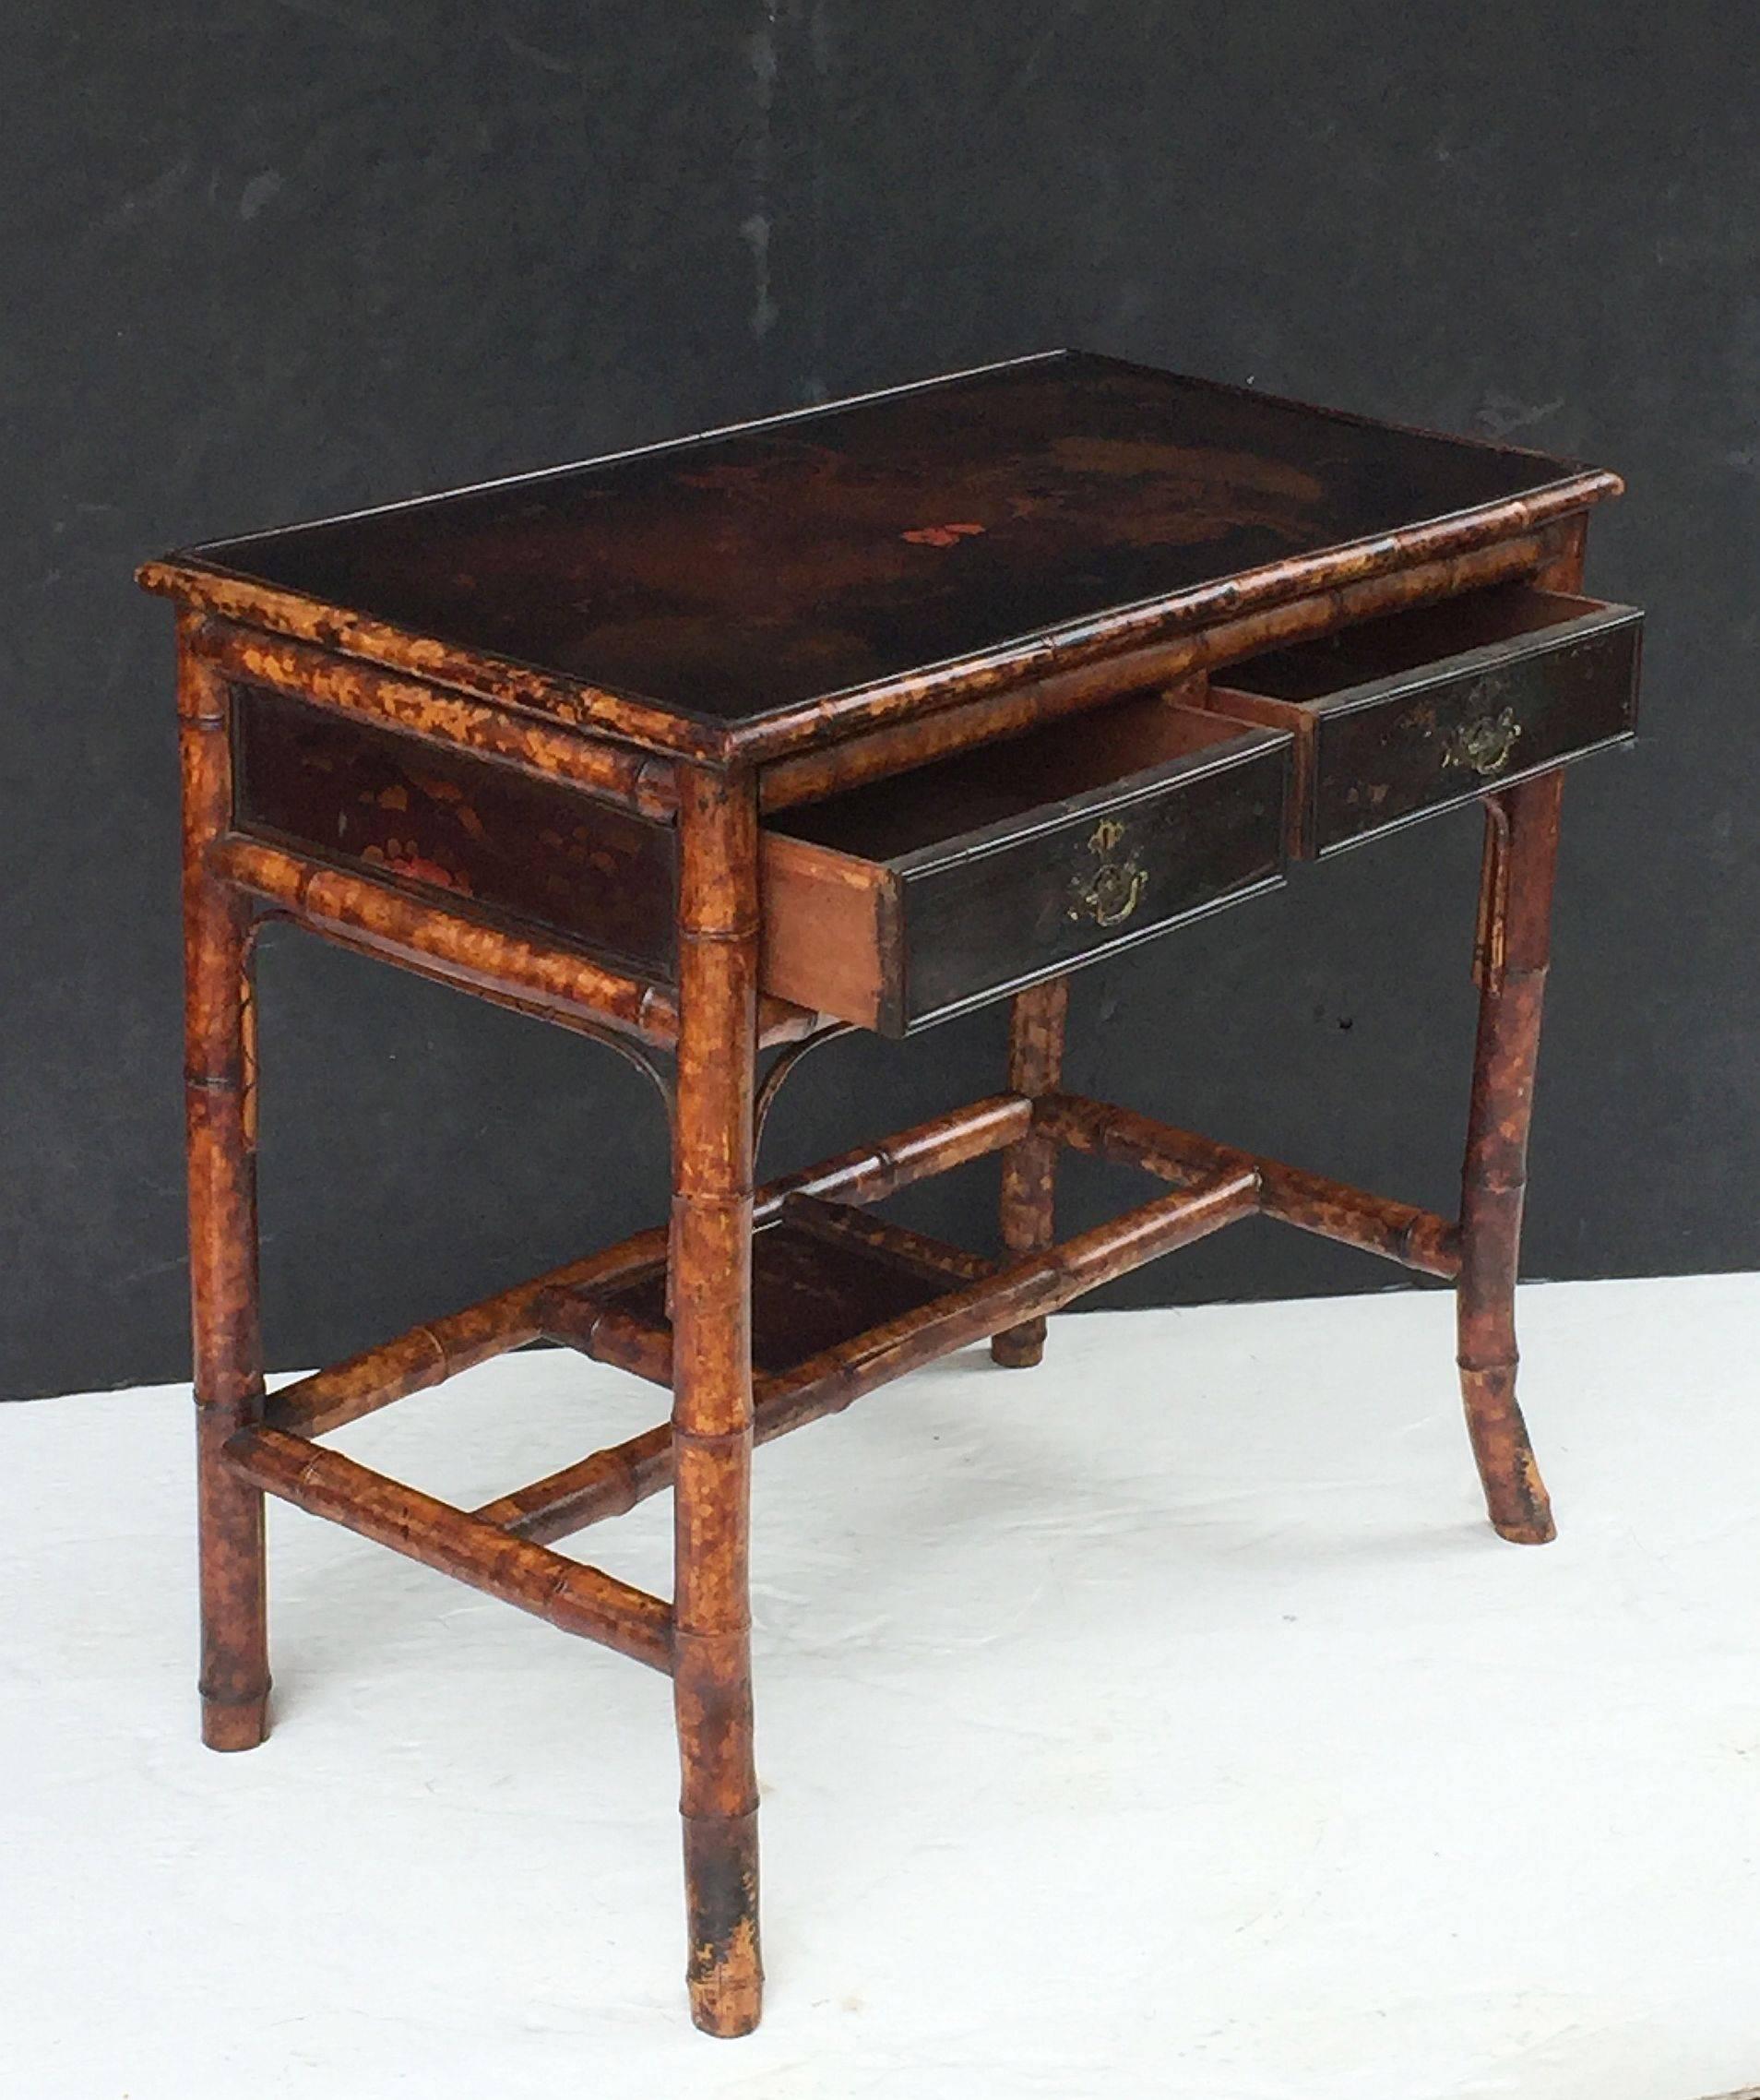 Japanned English Bamboo Desk or Writing Table with Lacquered Top